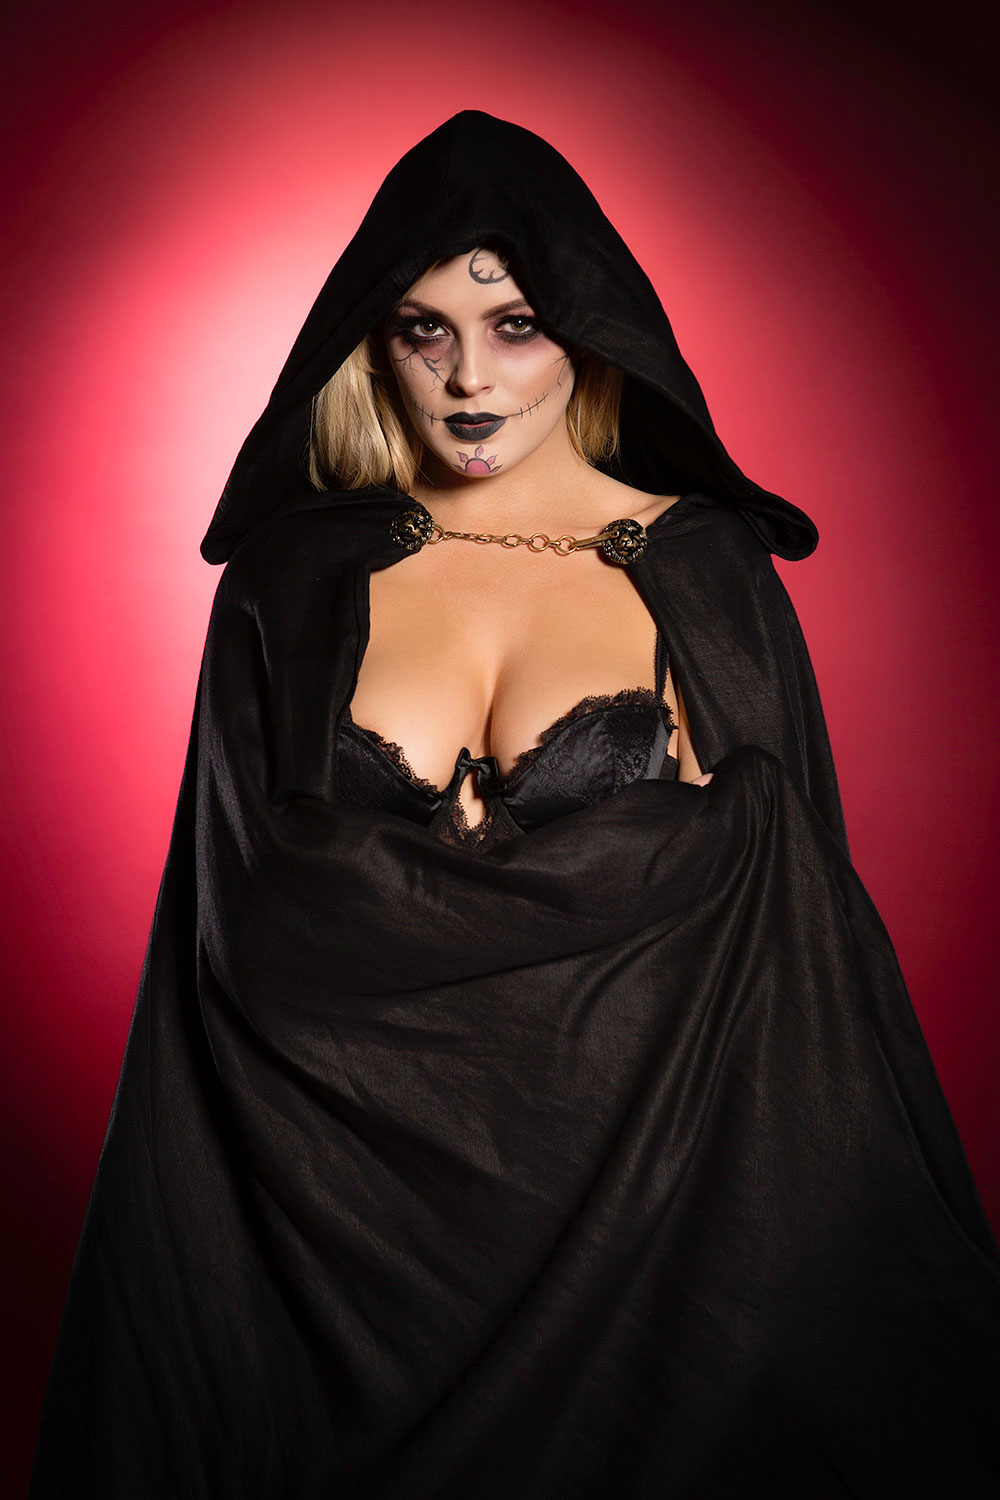 Danielle Sellers was spooky, sexy for Halloween and Page 3